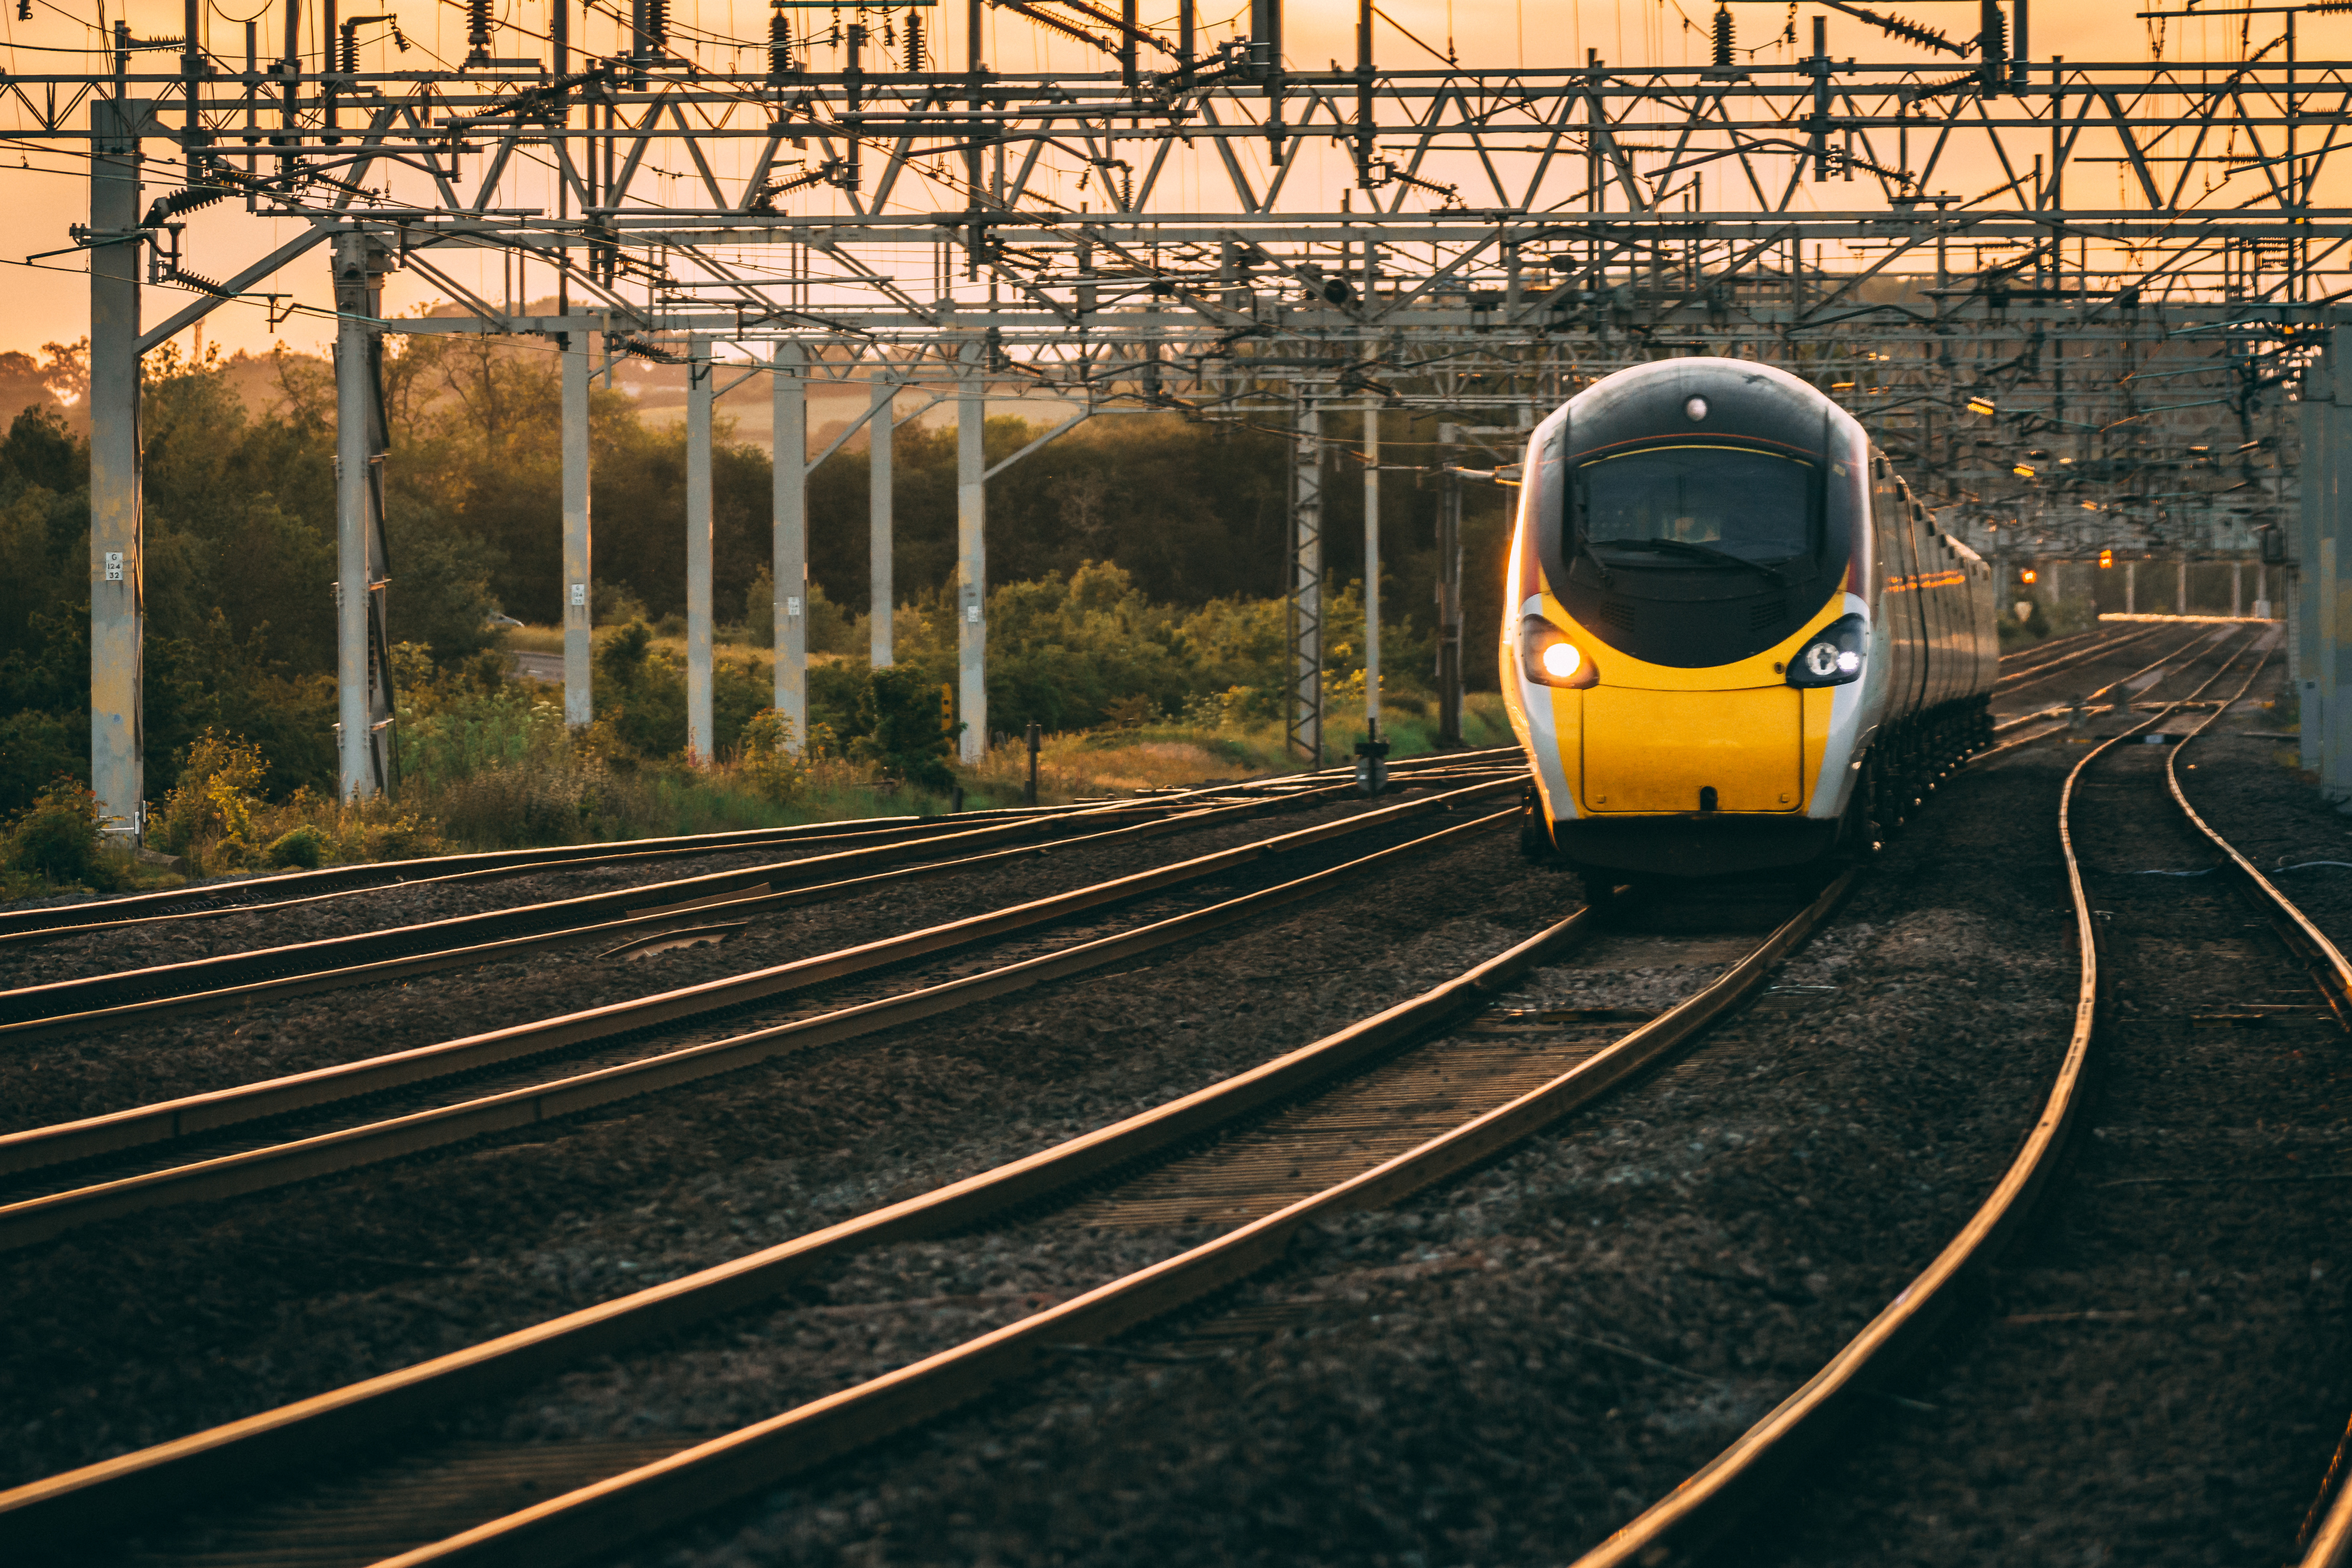 Rail Fleet Decarbonization Opportunity: What Does it Mean for You? - Railway  Age